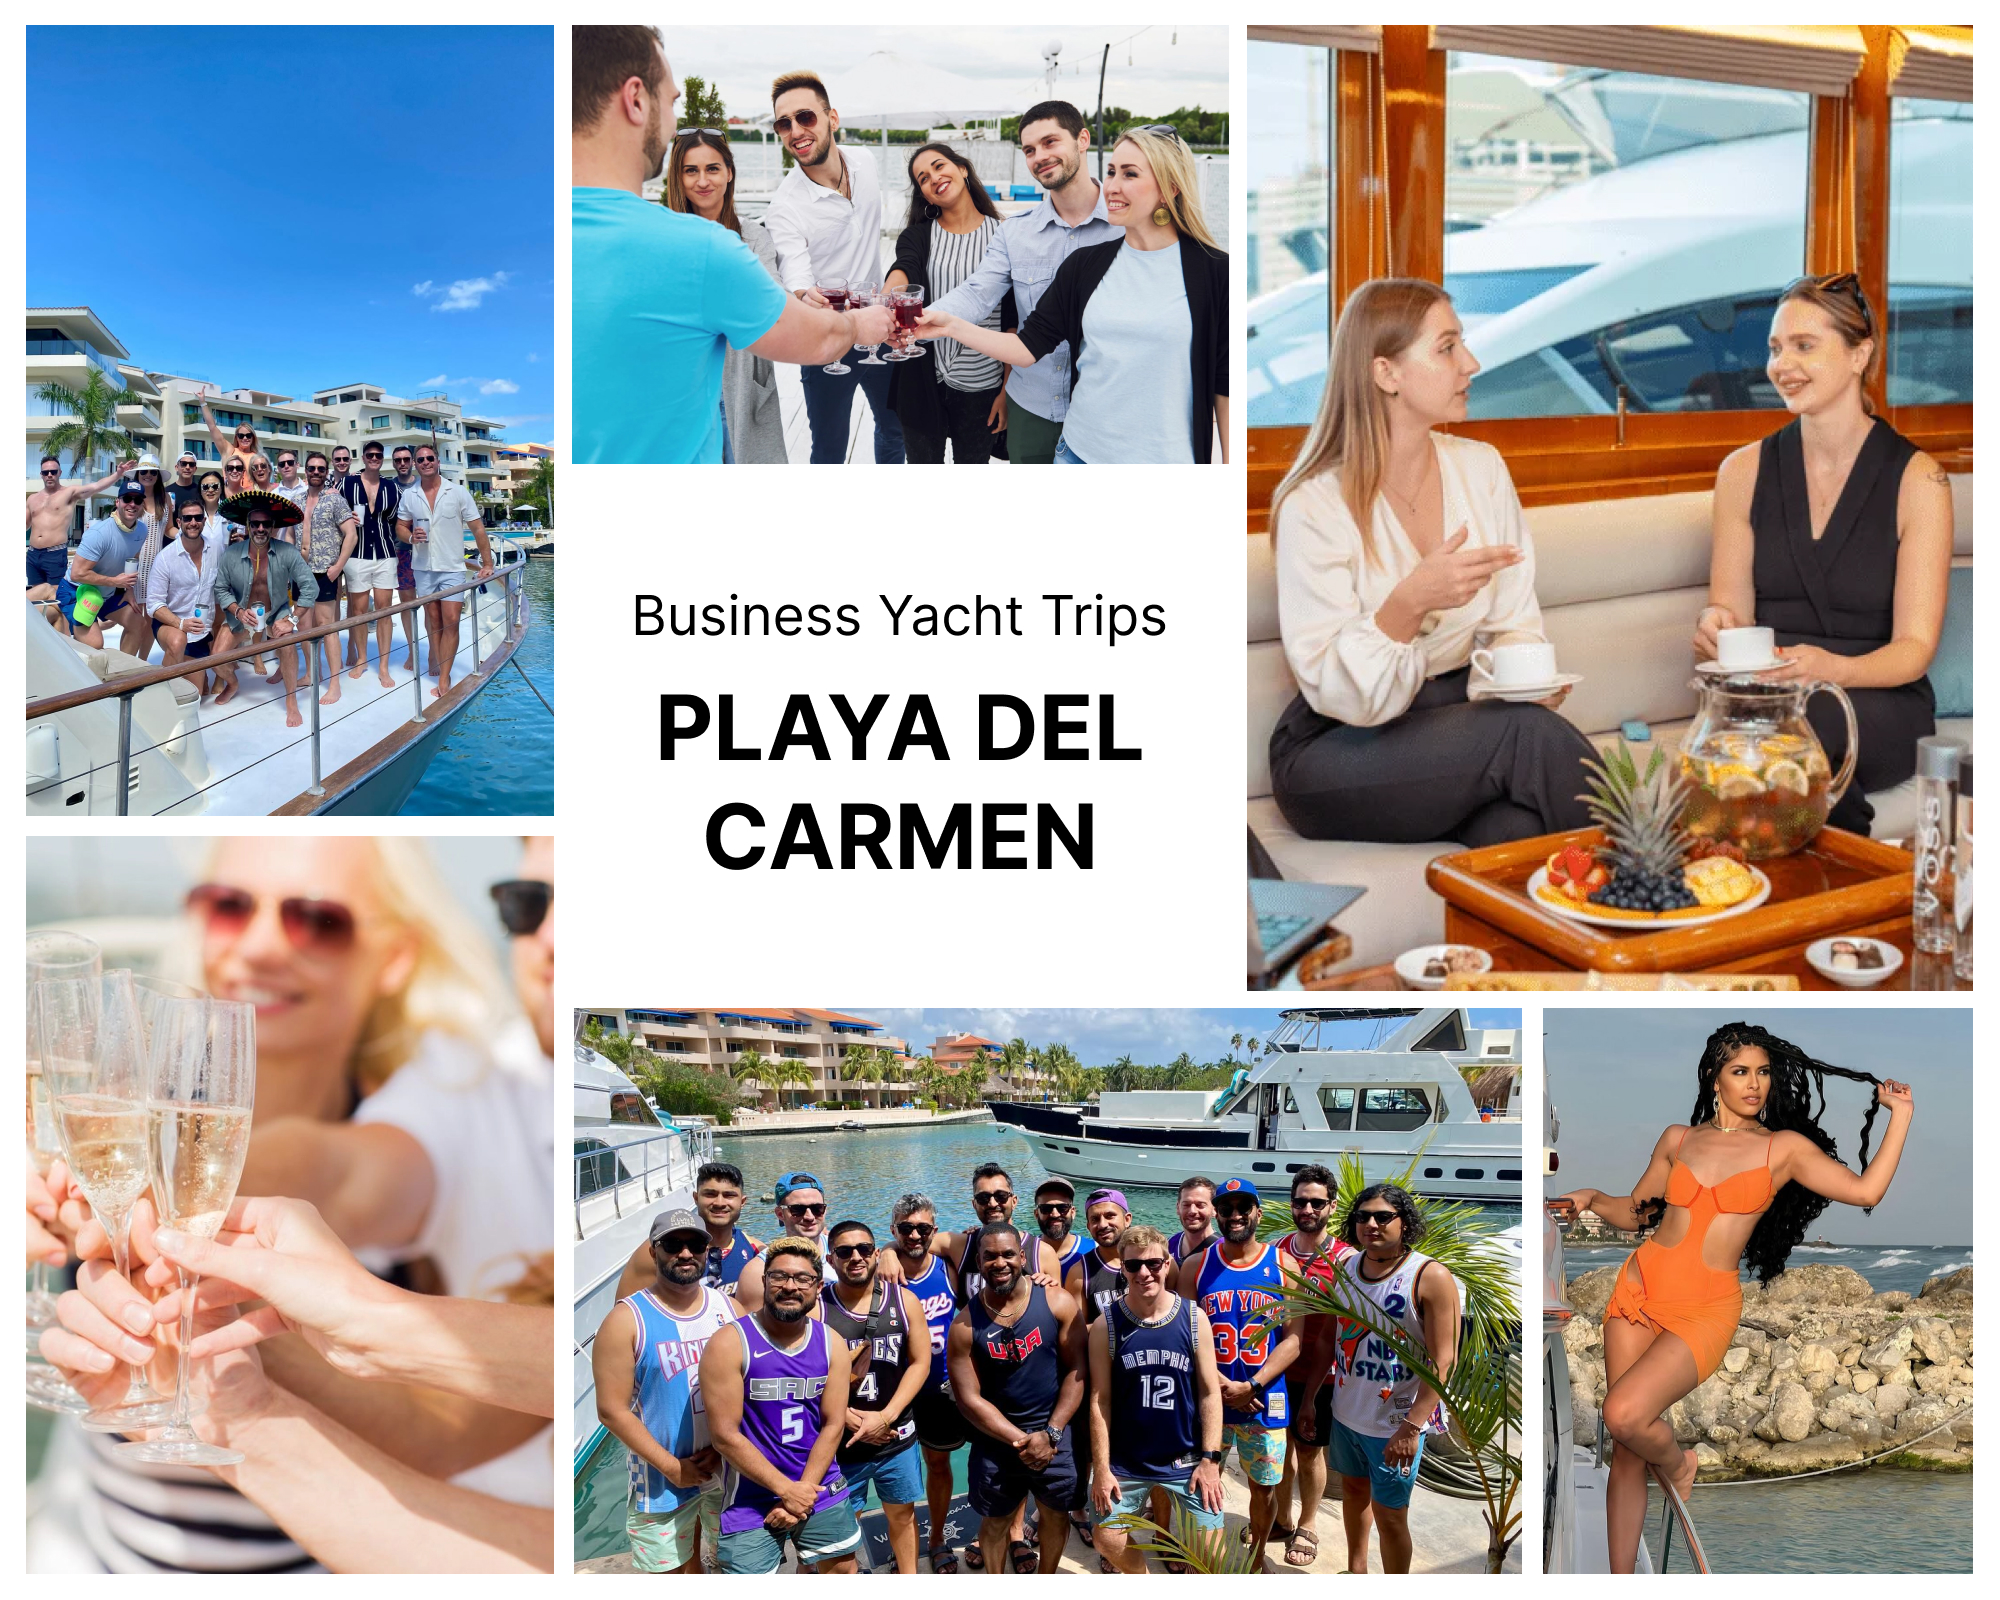 Playa Del Carmen Yachting and Catamaran for Corporate and Business Yacht Trips